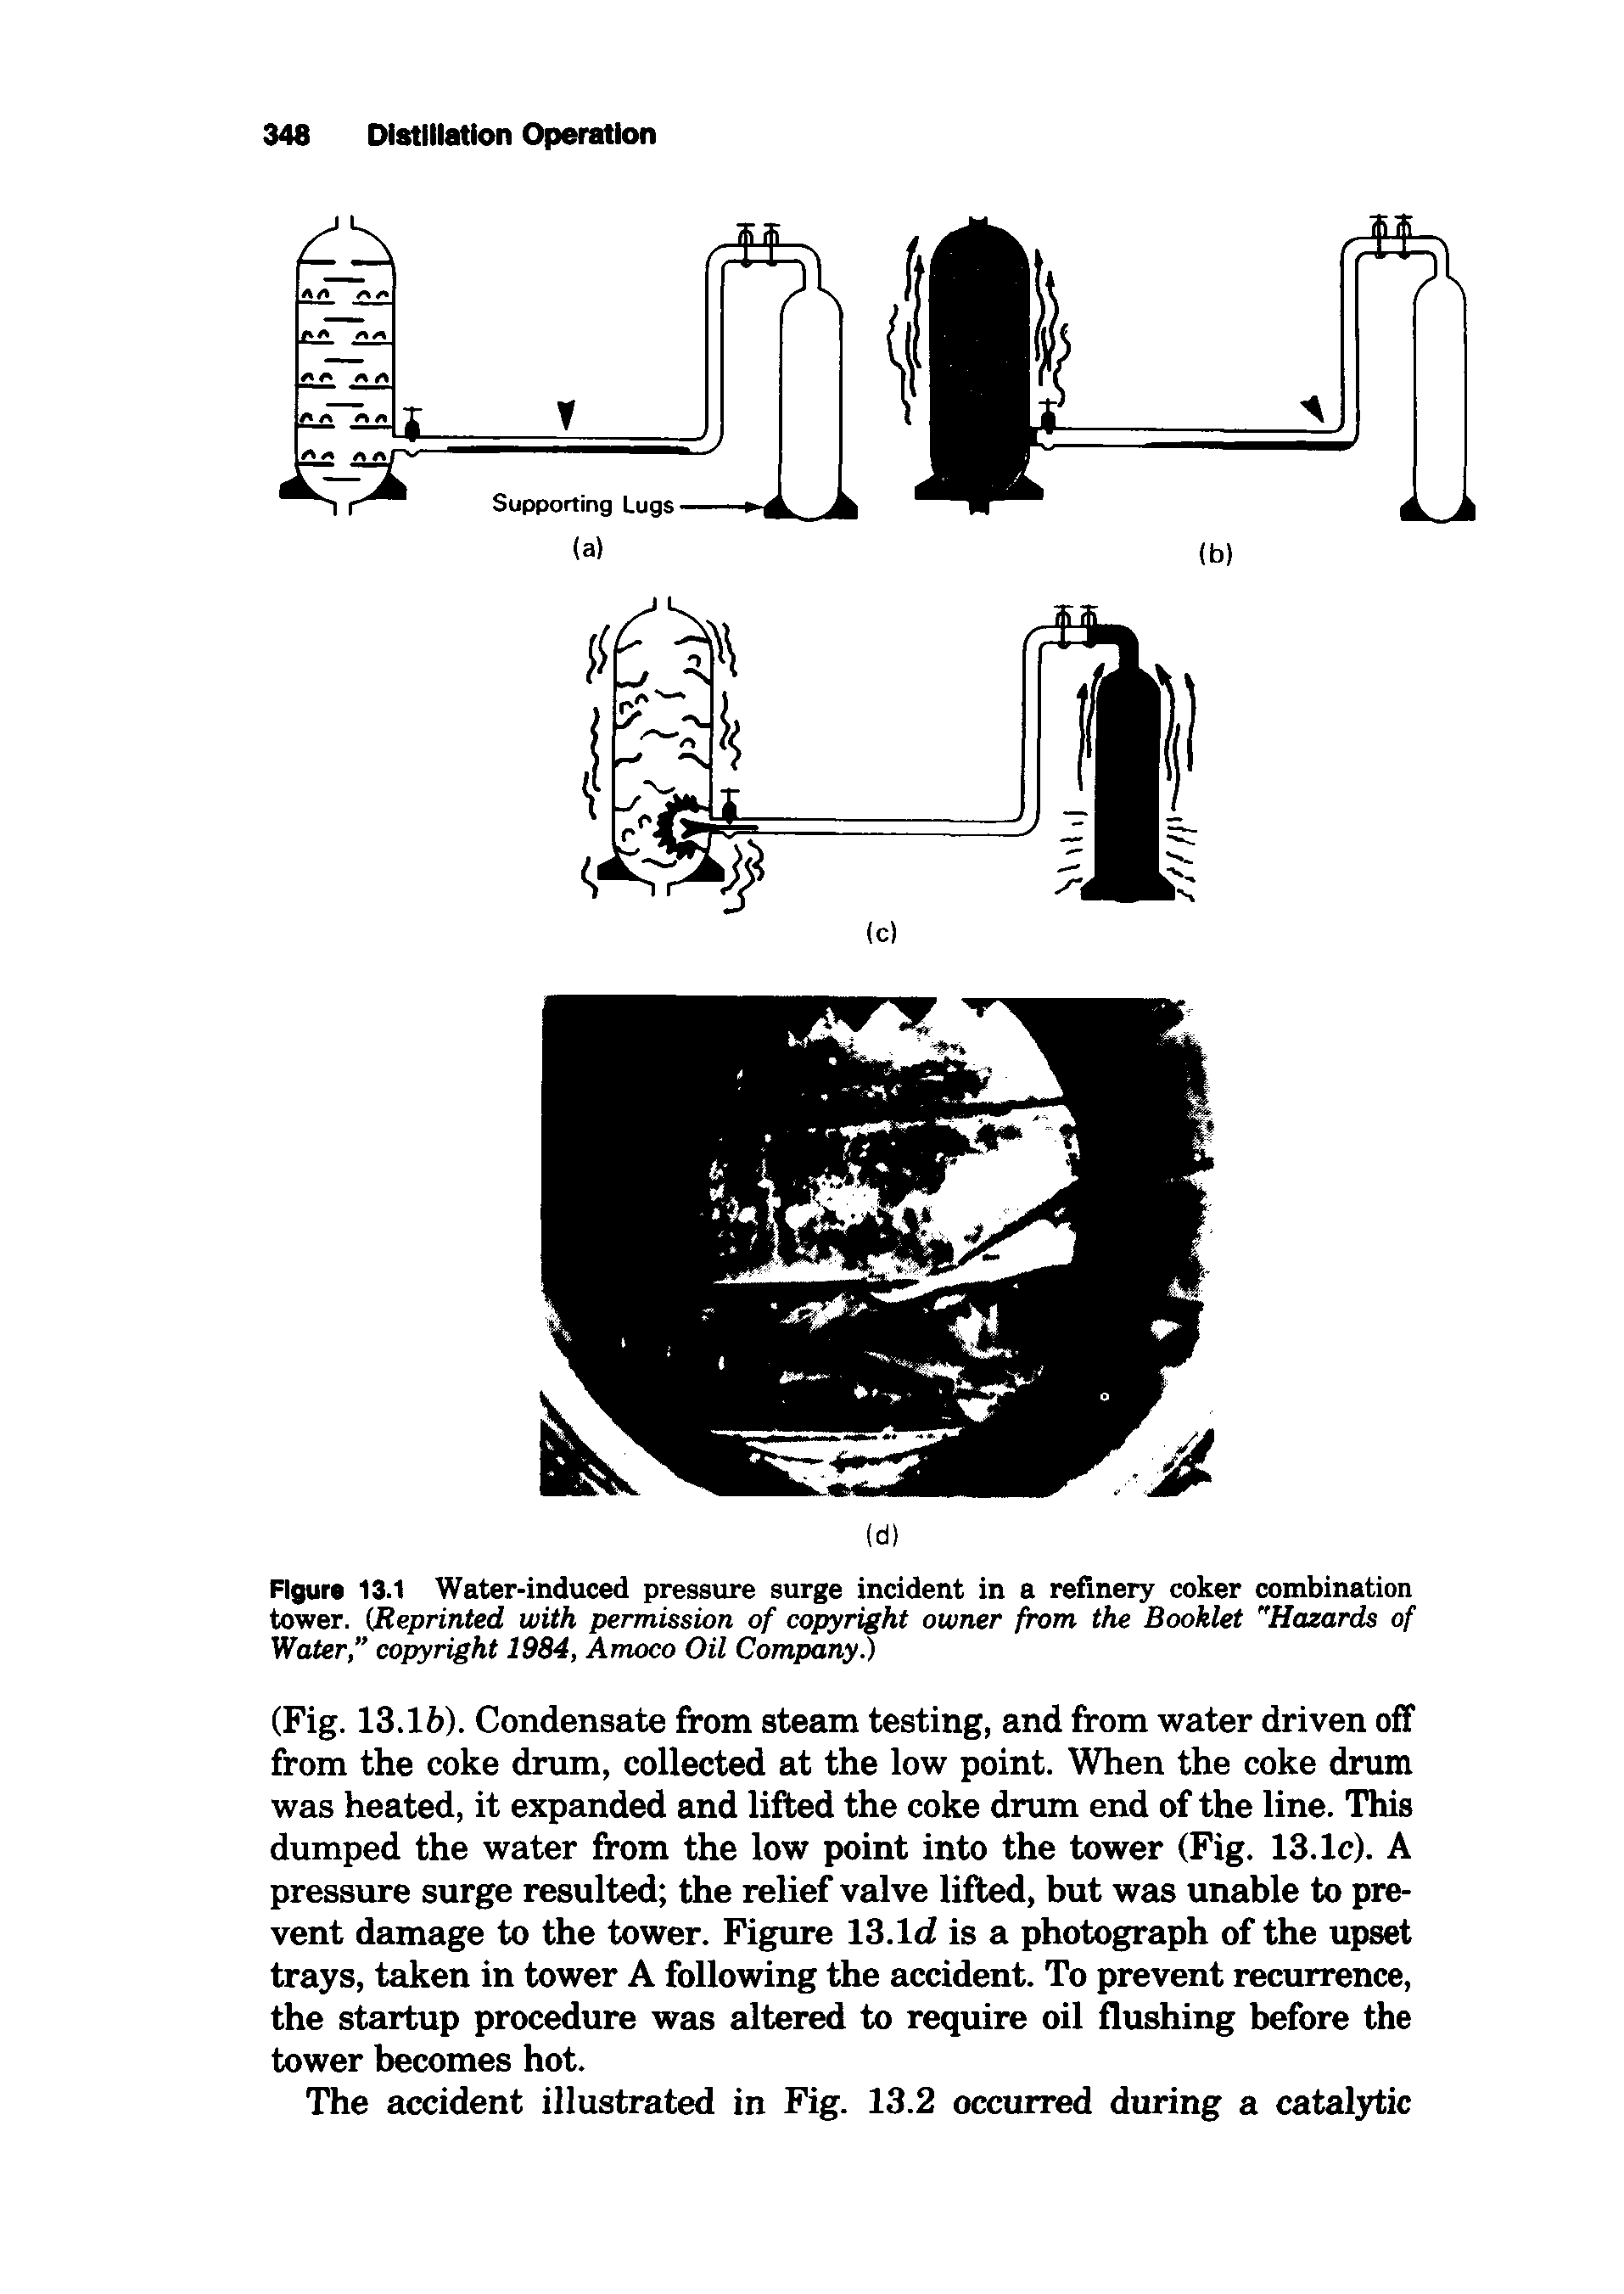 Figure 13.1 Water-induced pressure surge incident in a refinery coker combination tower. (Reprinted with permission of copyright owner from the Booklet "Hazards of Water," copyright 1984, Amoco Oil Company ...